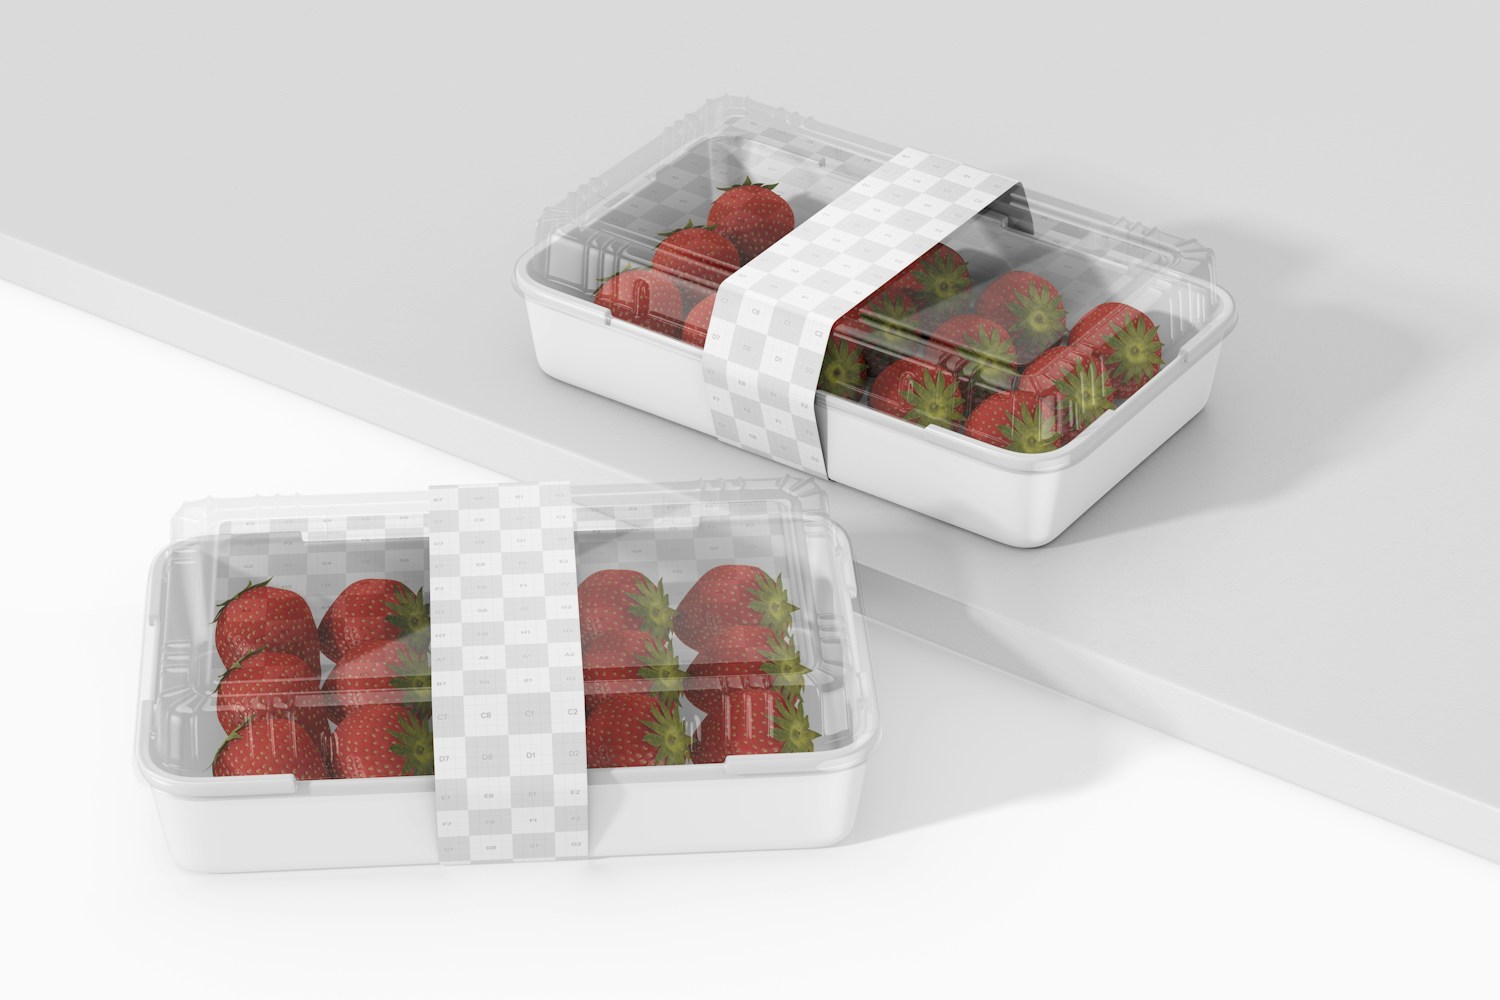 Fruit Containers with Label Mockup